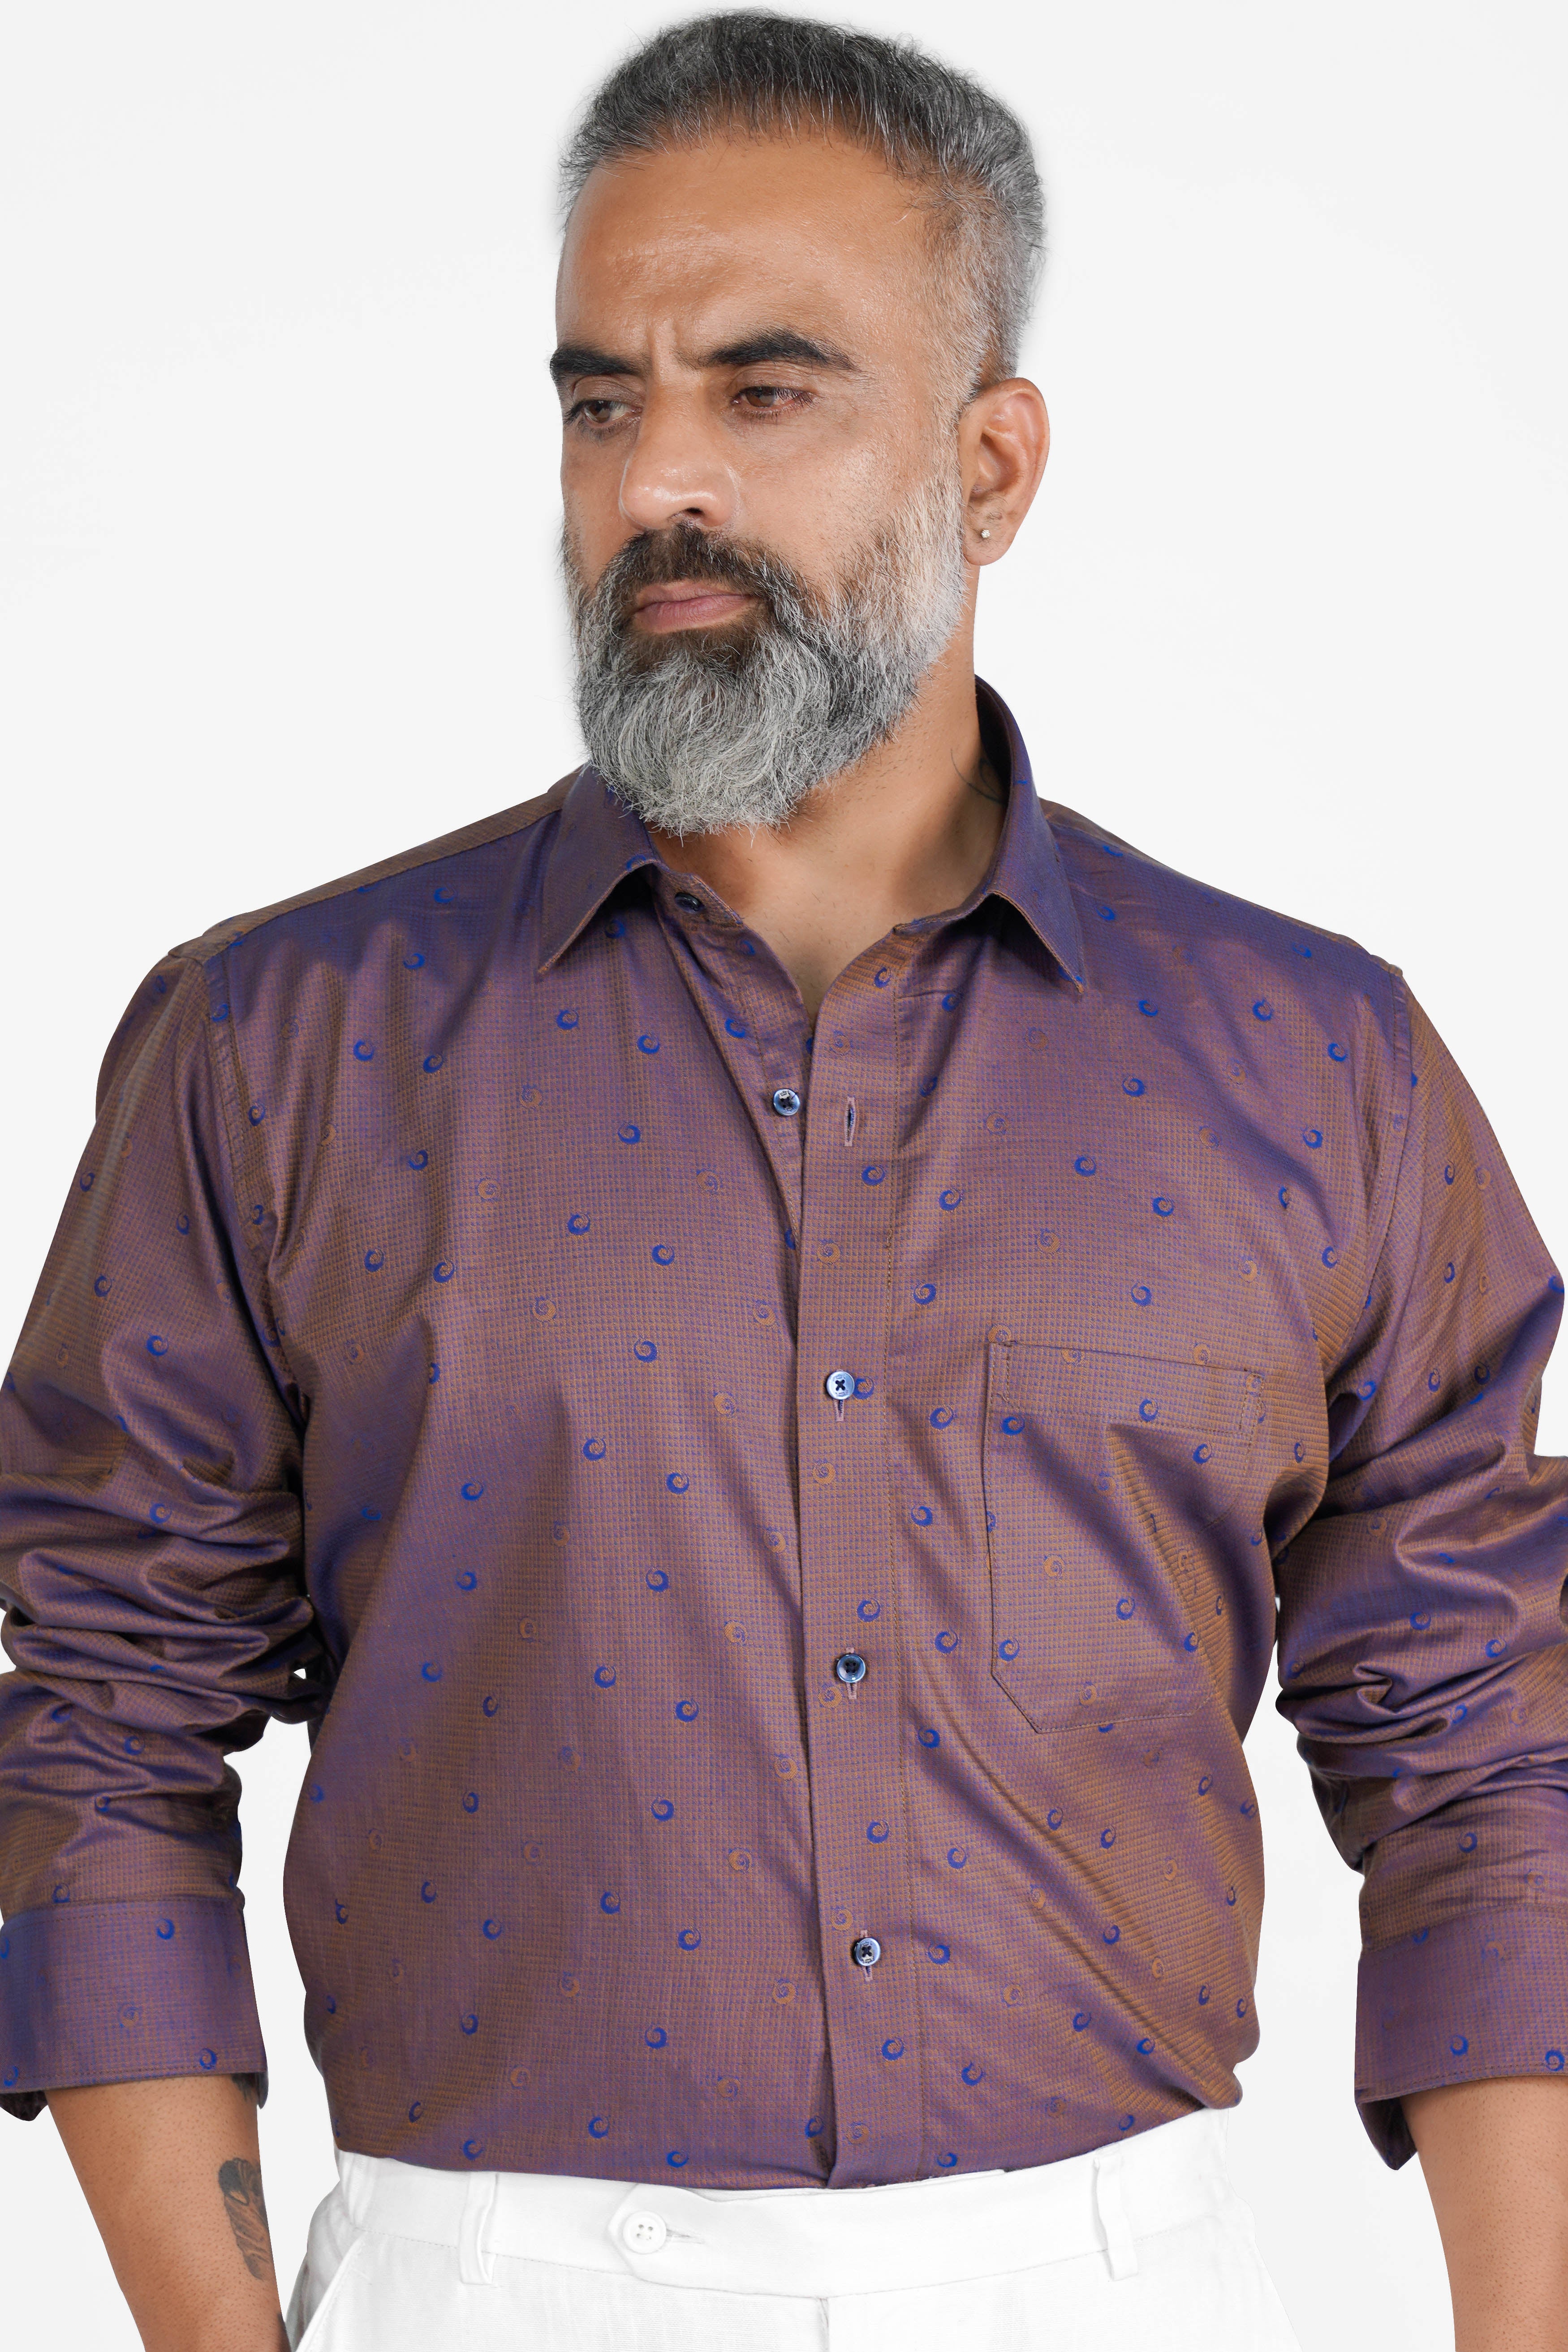 Spicy Mix Brown and Chambray Blue Jacquard Textured Premium Giza Cotton Shirt